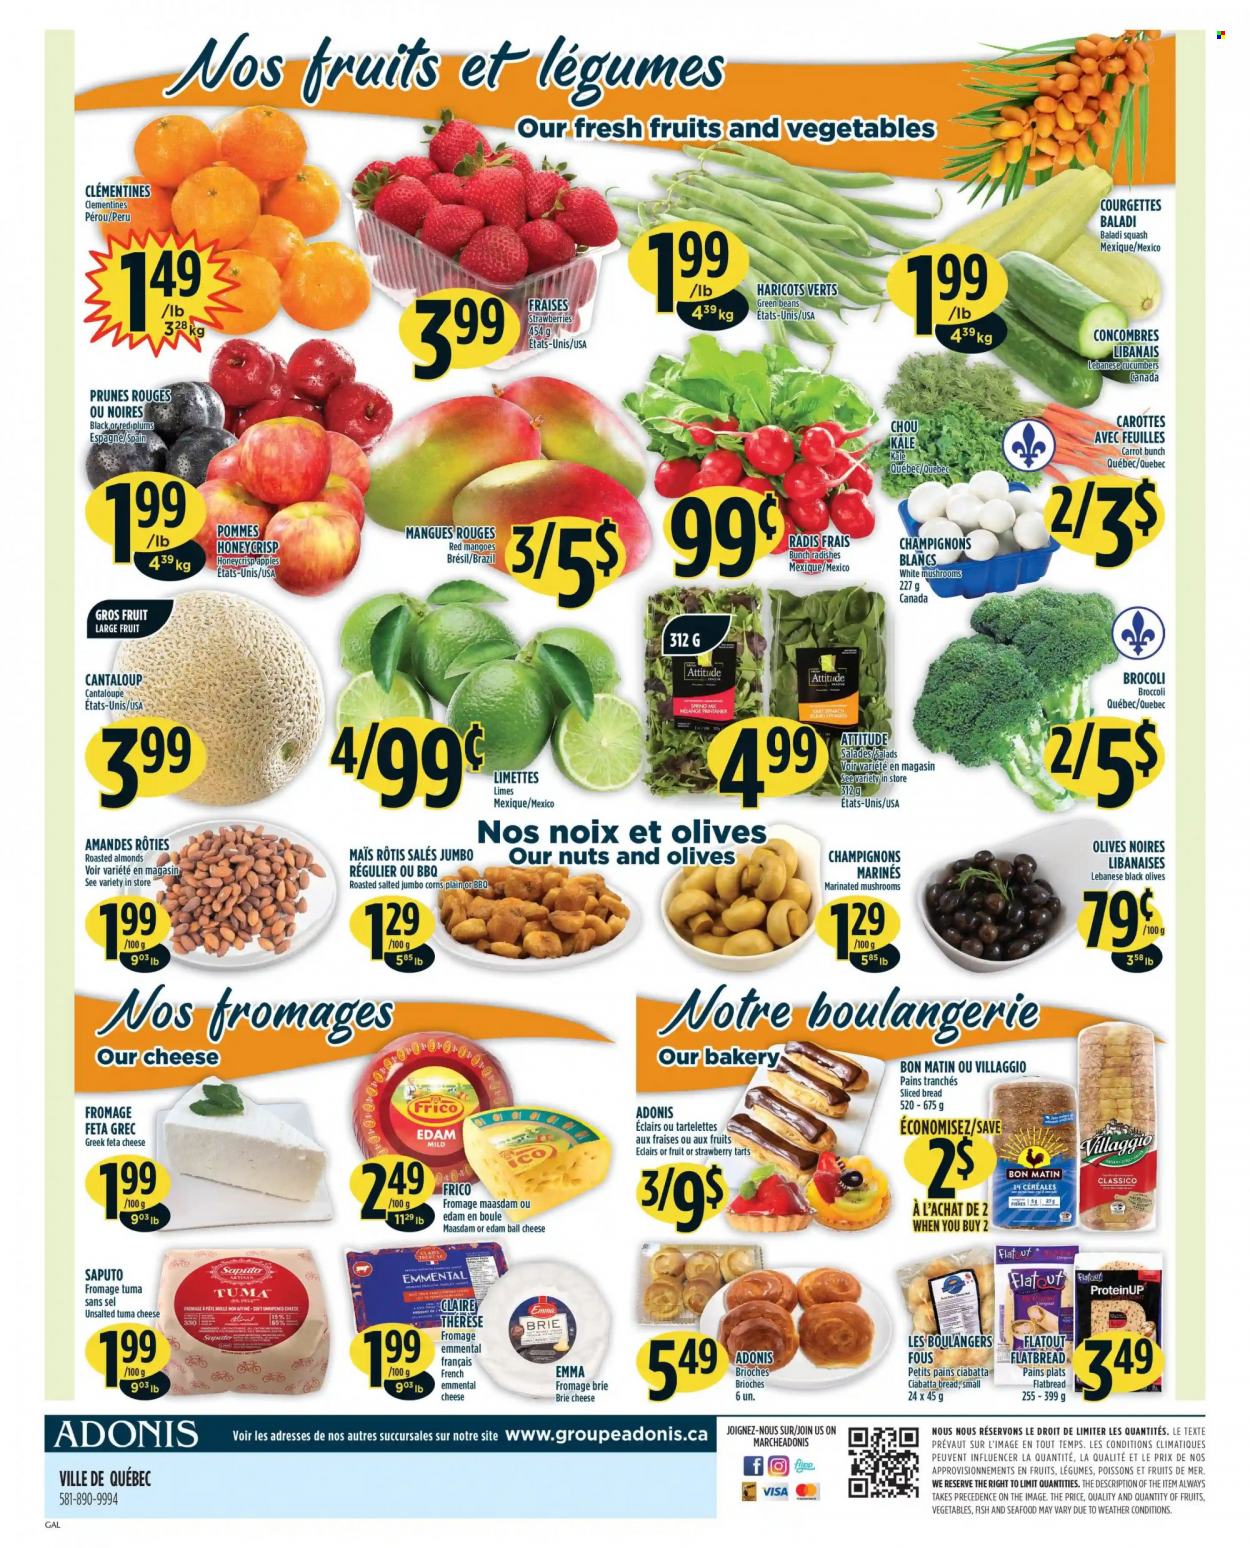 thumbnail - Adonis Flyer - October 14, 2021 - October 20, 2021 - Sales products - mushrooms, flatbread, beans, broccoli, cantaloupe, cucumber, green beans, radishes, kale, apples, clementines, limes, mango, seafood, edam cheese, cheese, brie, feta, Maasdam, Classico, almonds, prunes, dried fruit, ciabatta, olives. Page 4.